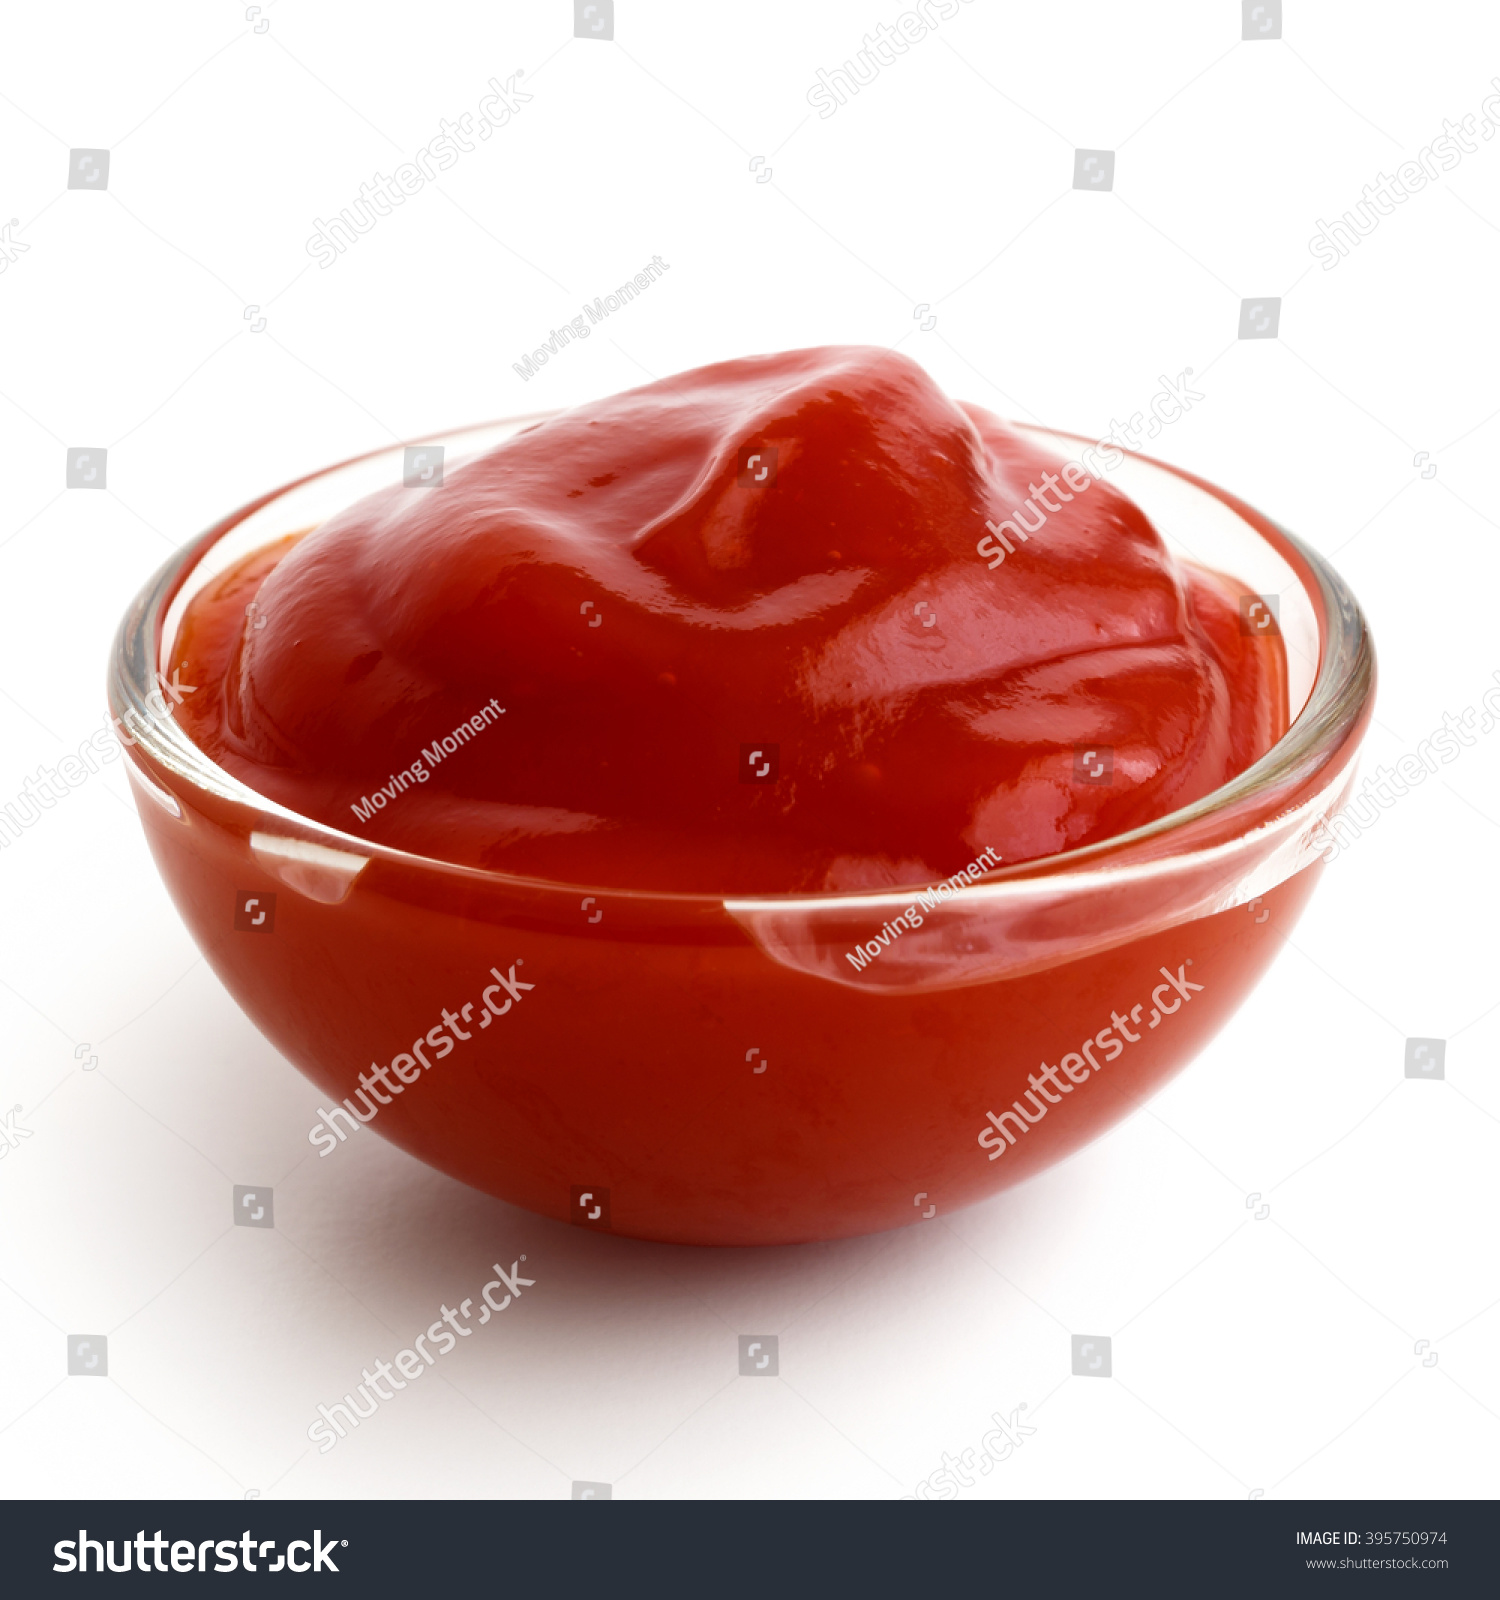 Small glass condiment bowl of red tomato sauce ketchup. Isolated on white in perspective. #395750974